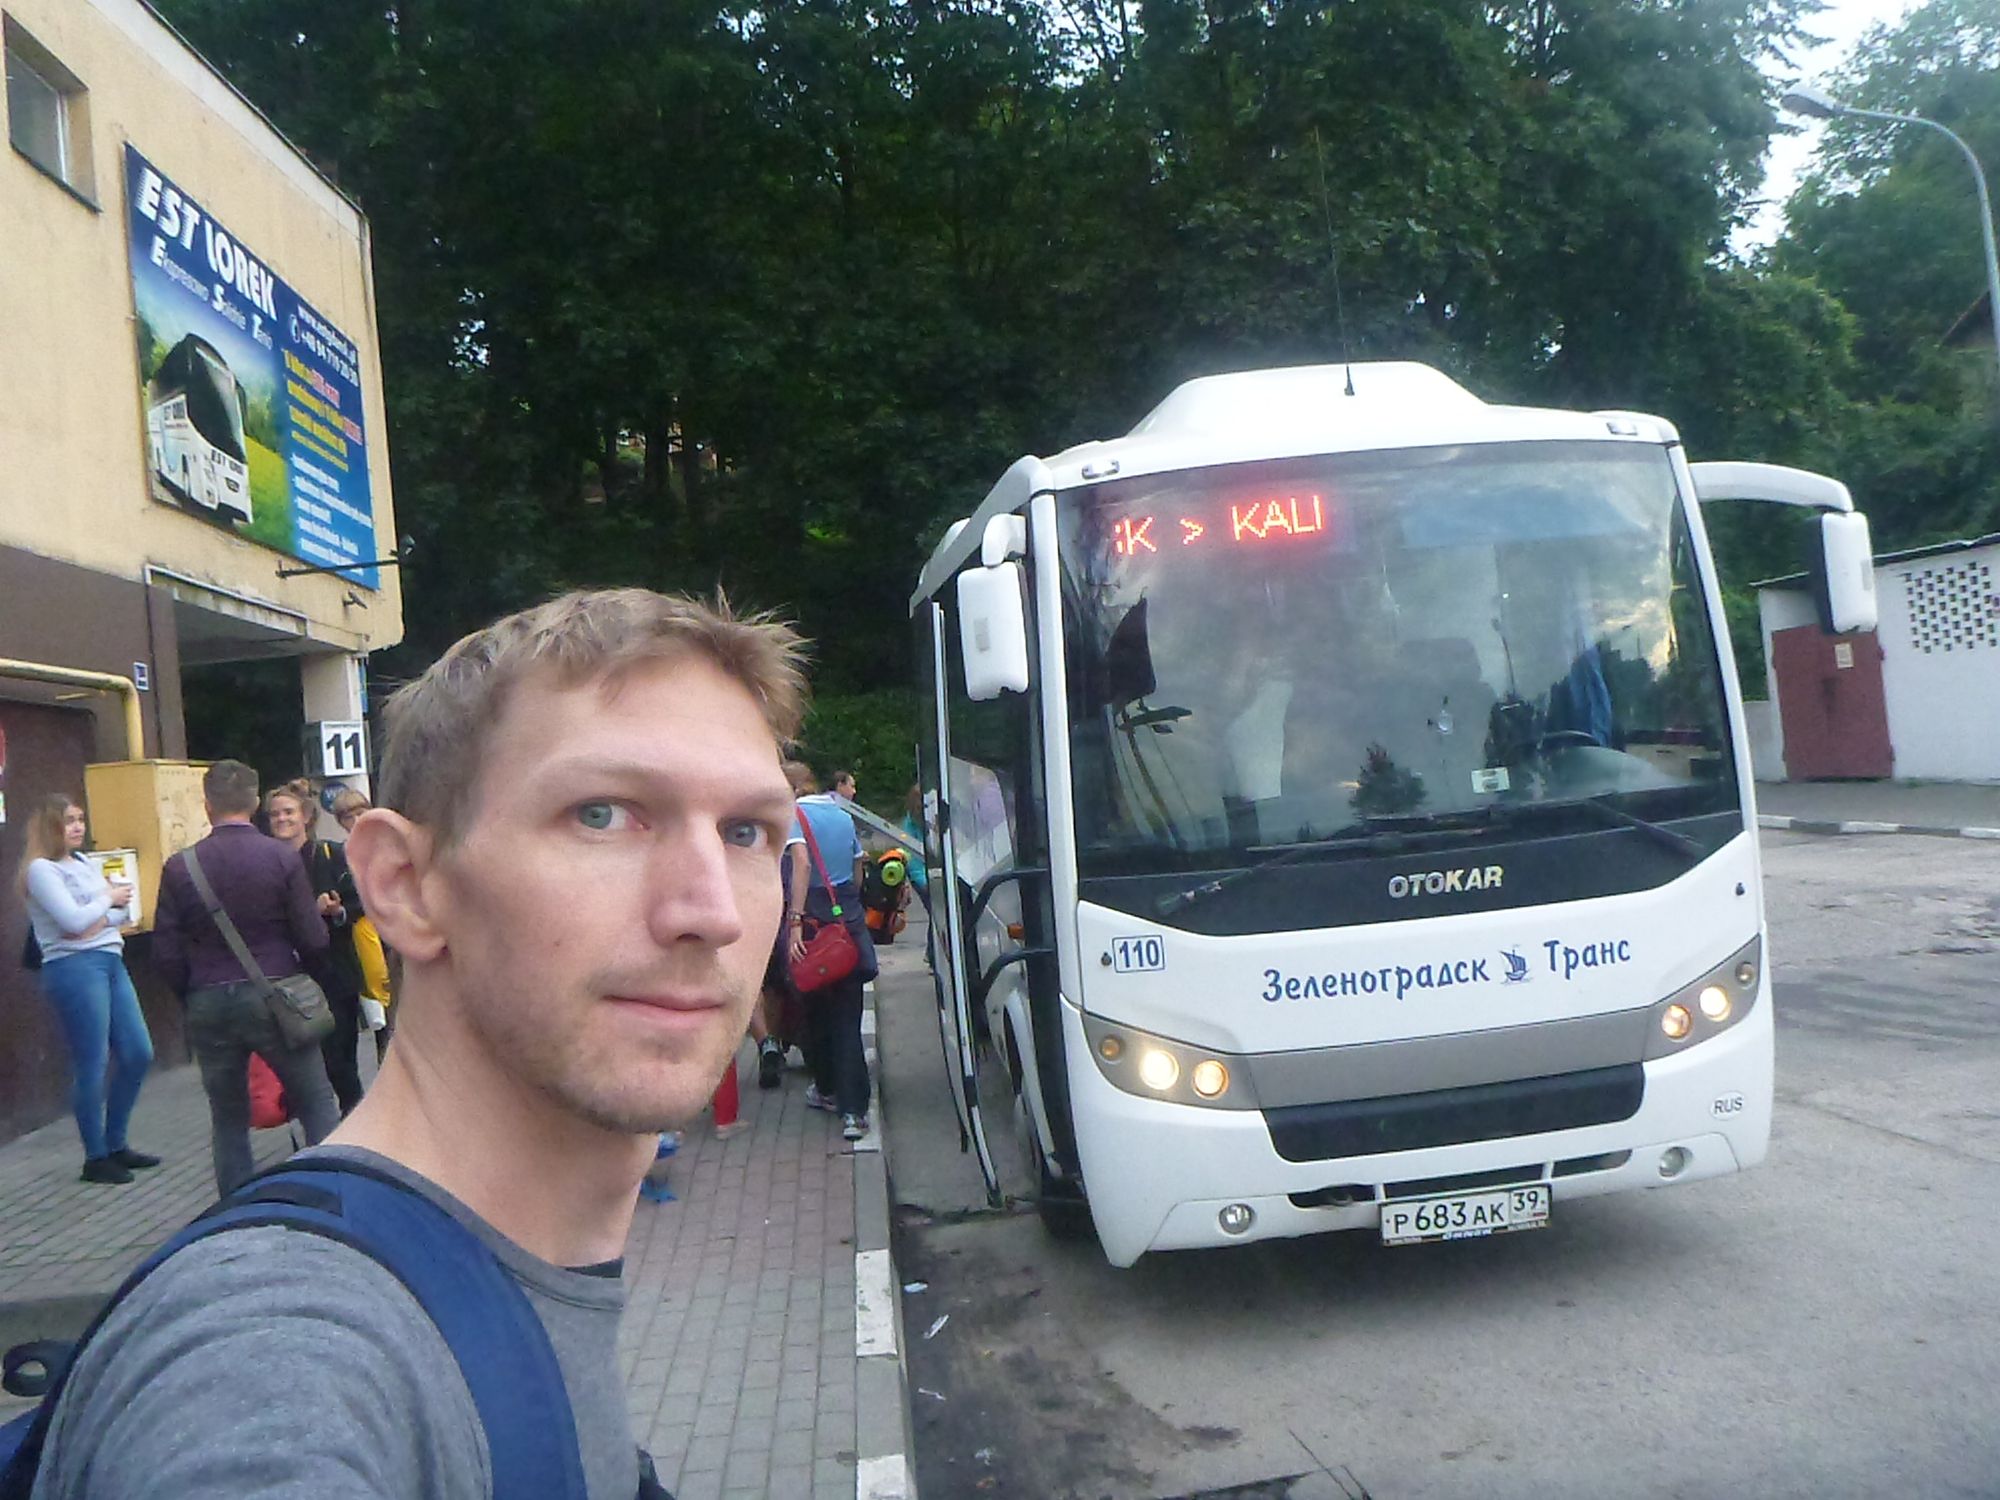 World Borders: How to Get From Poland to Kaliningrad (Gdańsk to Kaliningrad City)